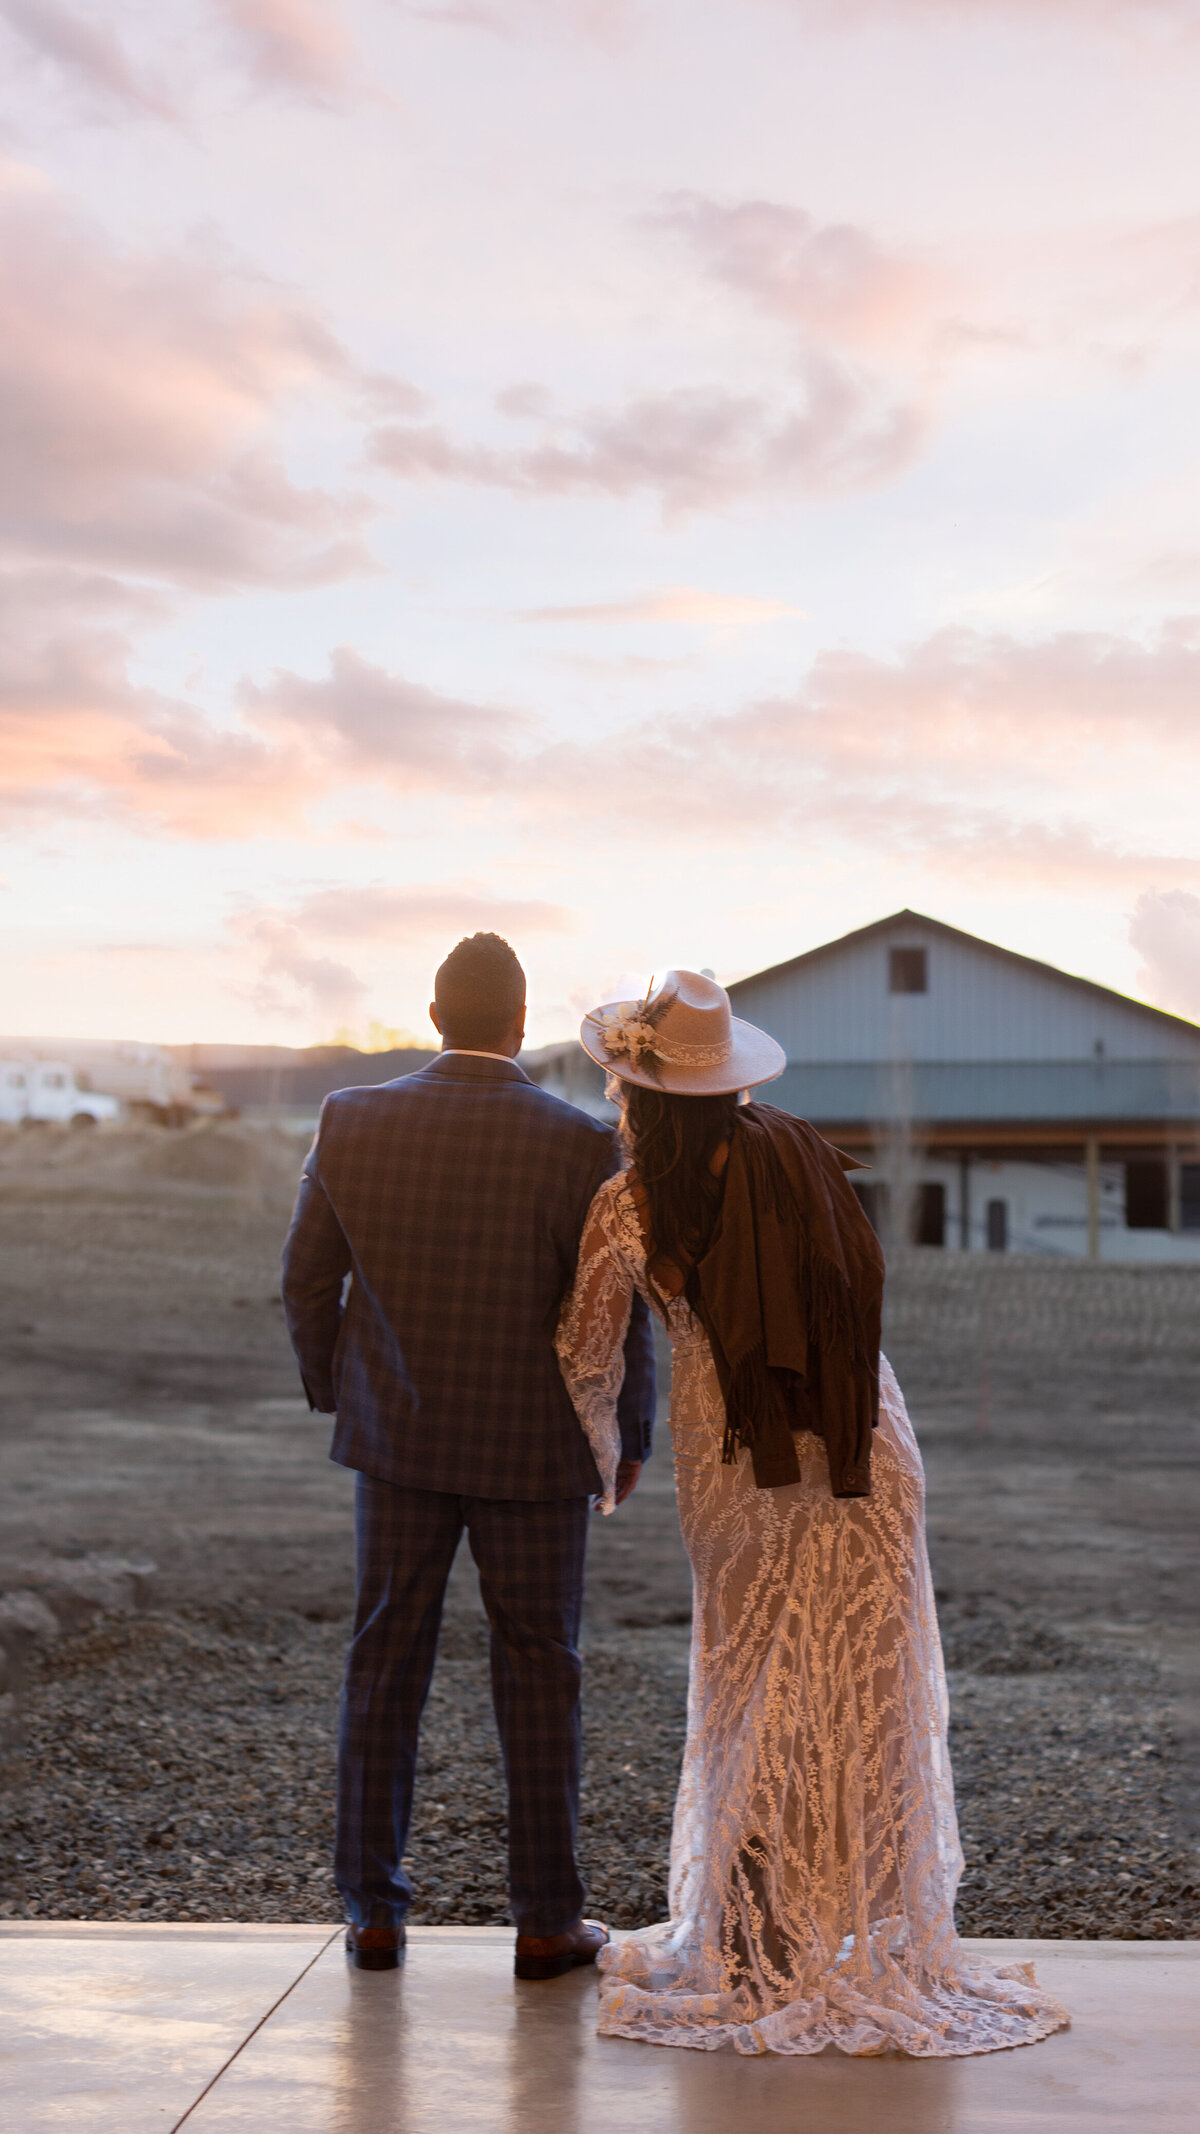 Couple standing overlooking the farm. She's wearing the hat.